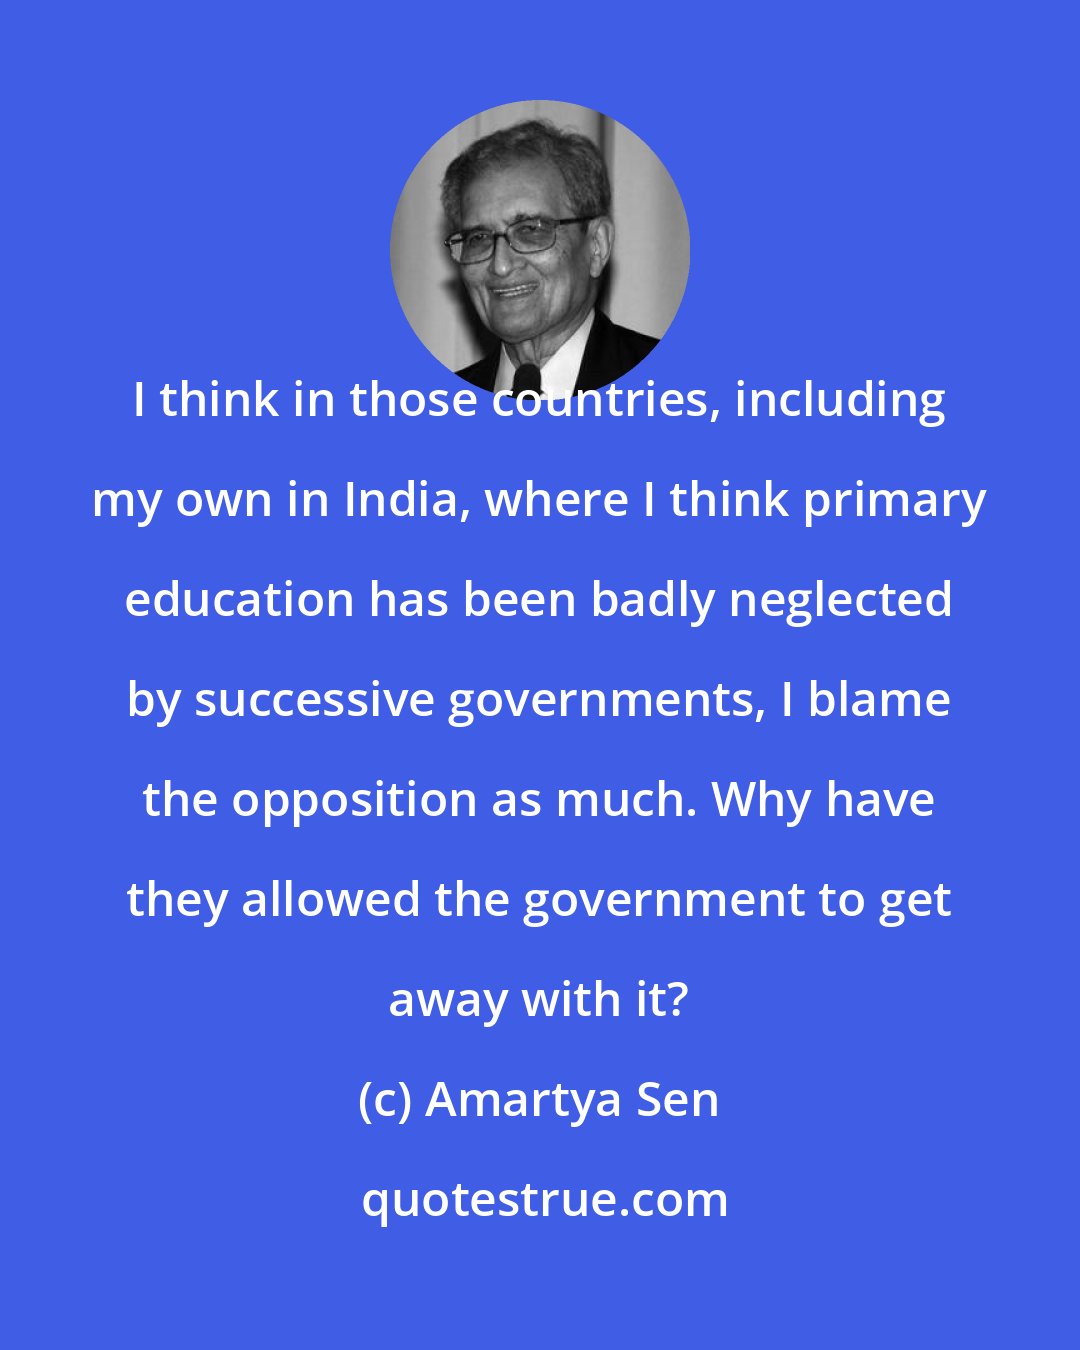 Amartya Sen: I think in those countries, including my own in India, where I think primary education has been badly neglected by successive governments, I blame the opposition as much. Why have they allowed the government to get away with it?